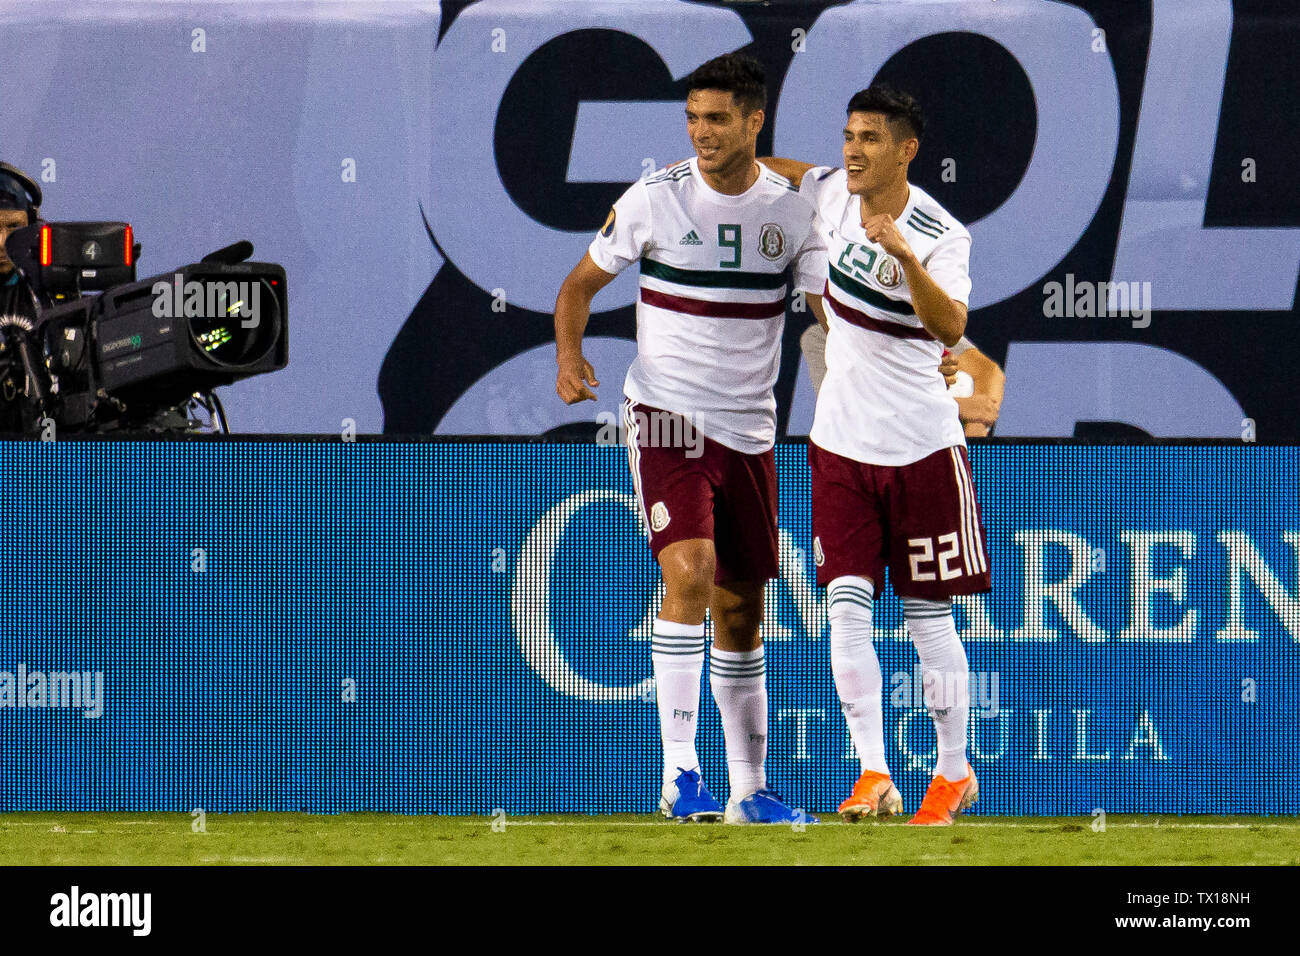 Charlotte, NC, USA. 23rd June, 2019. Mexico forward Raul Jimenez (9) celebrates with defender Jorge Sanchez (22) after scoring in the 2019 Gold Cup match at Bank of America Stadium in Charlotte, NC. (Scott Kinser) Credit: csm/Alamy Live News Stock Photo